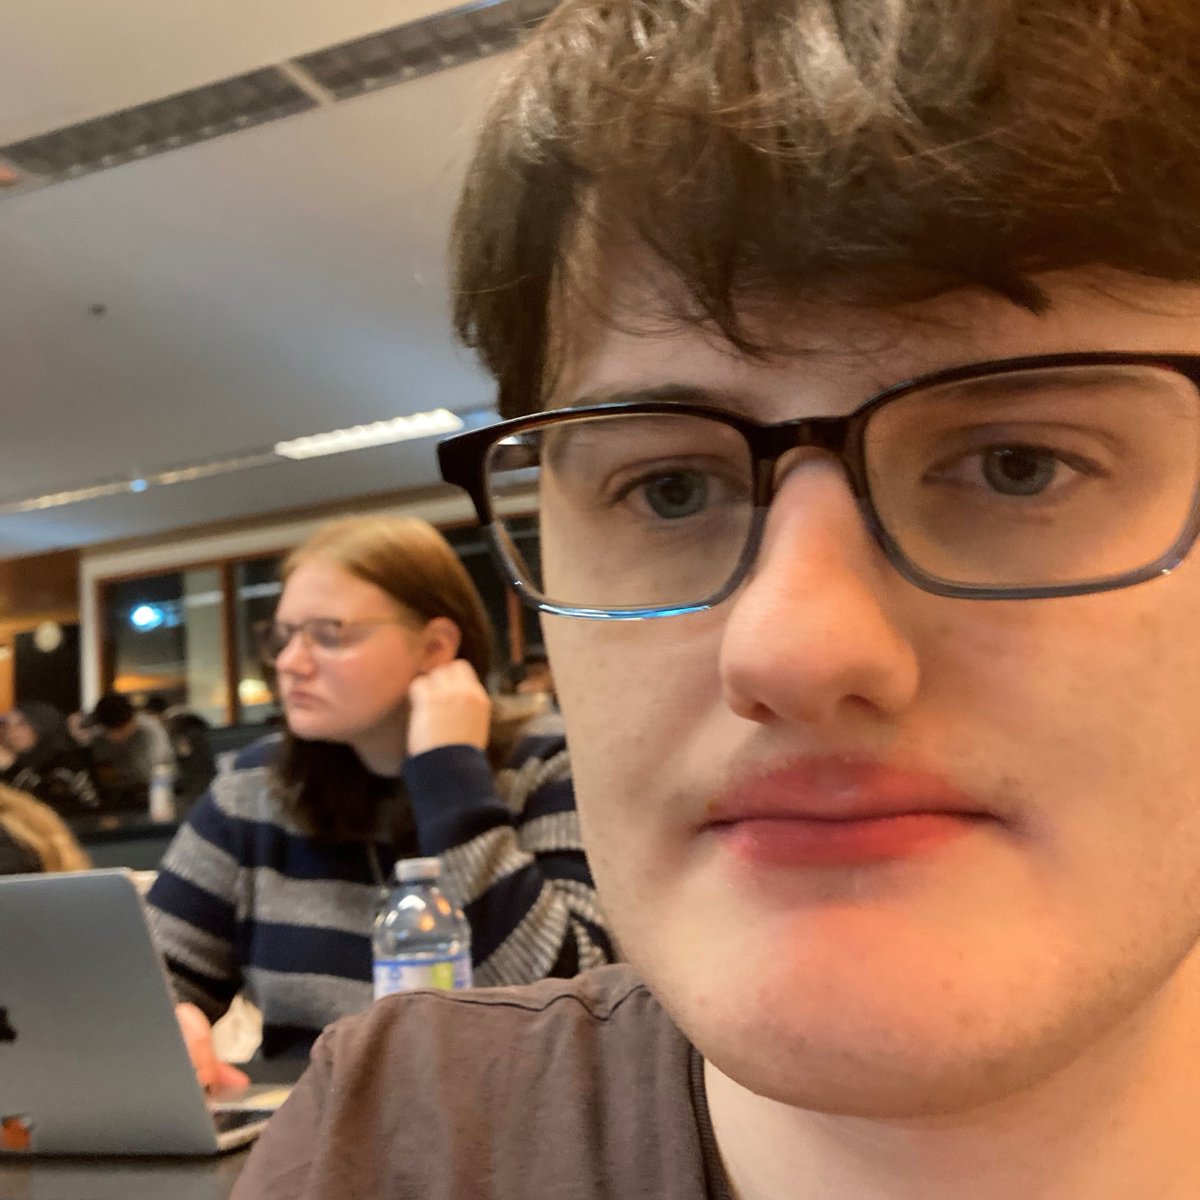 “The aspect of the Youth Advisory Council I enjoy the most is being able to virtually interact with many other people of a similar age to me, and who may have had similar life experiences to my own,” says Ethan, a Youth Advisory Council member. #NationalYouthWeek